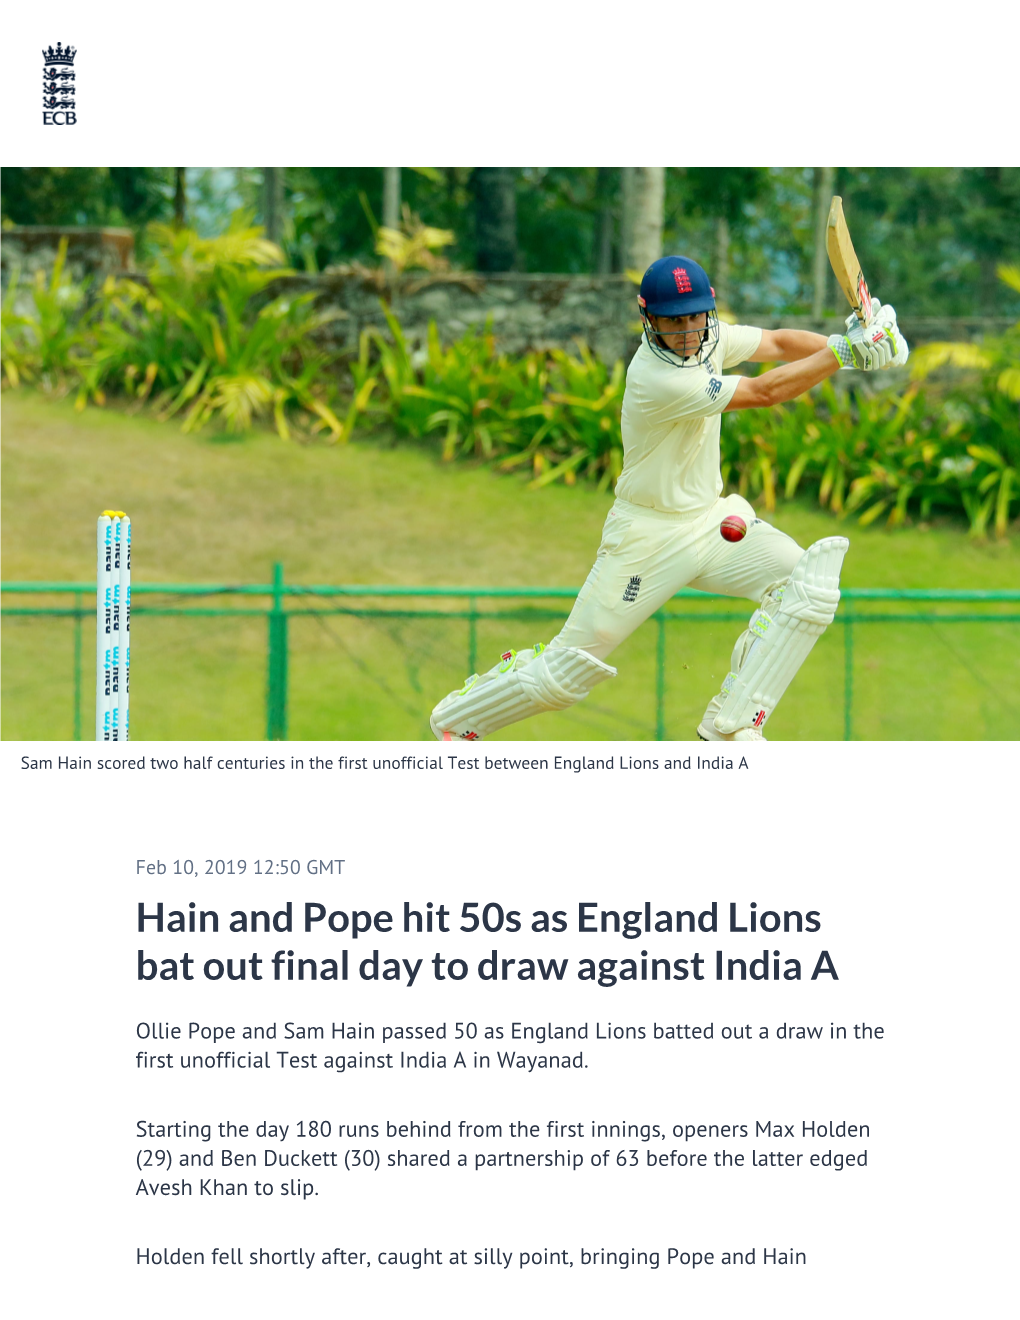 Hain and Pope Hit 50S As England Lions Bat out Final Day to Draw Against India A